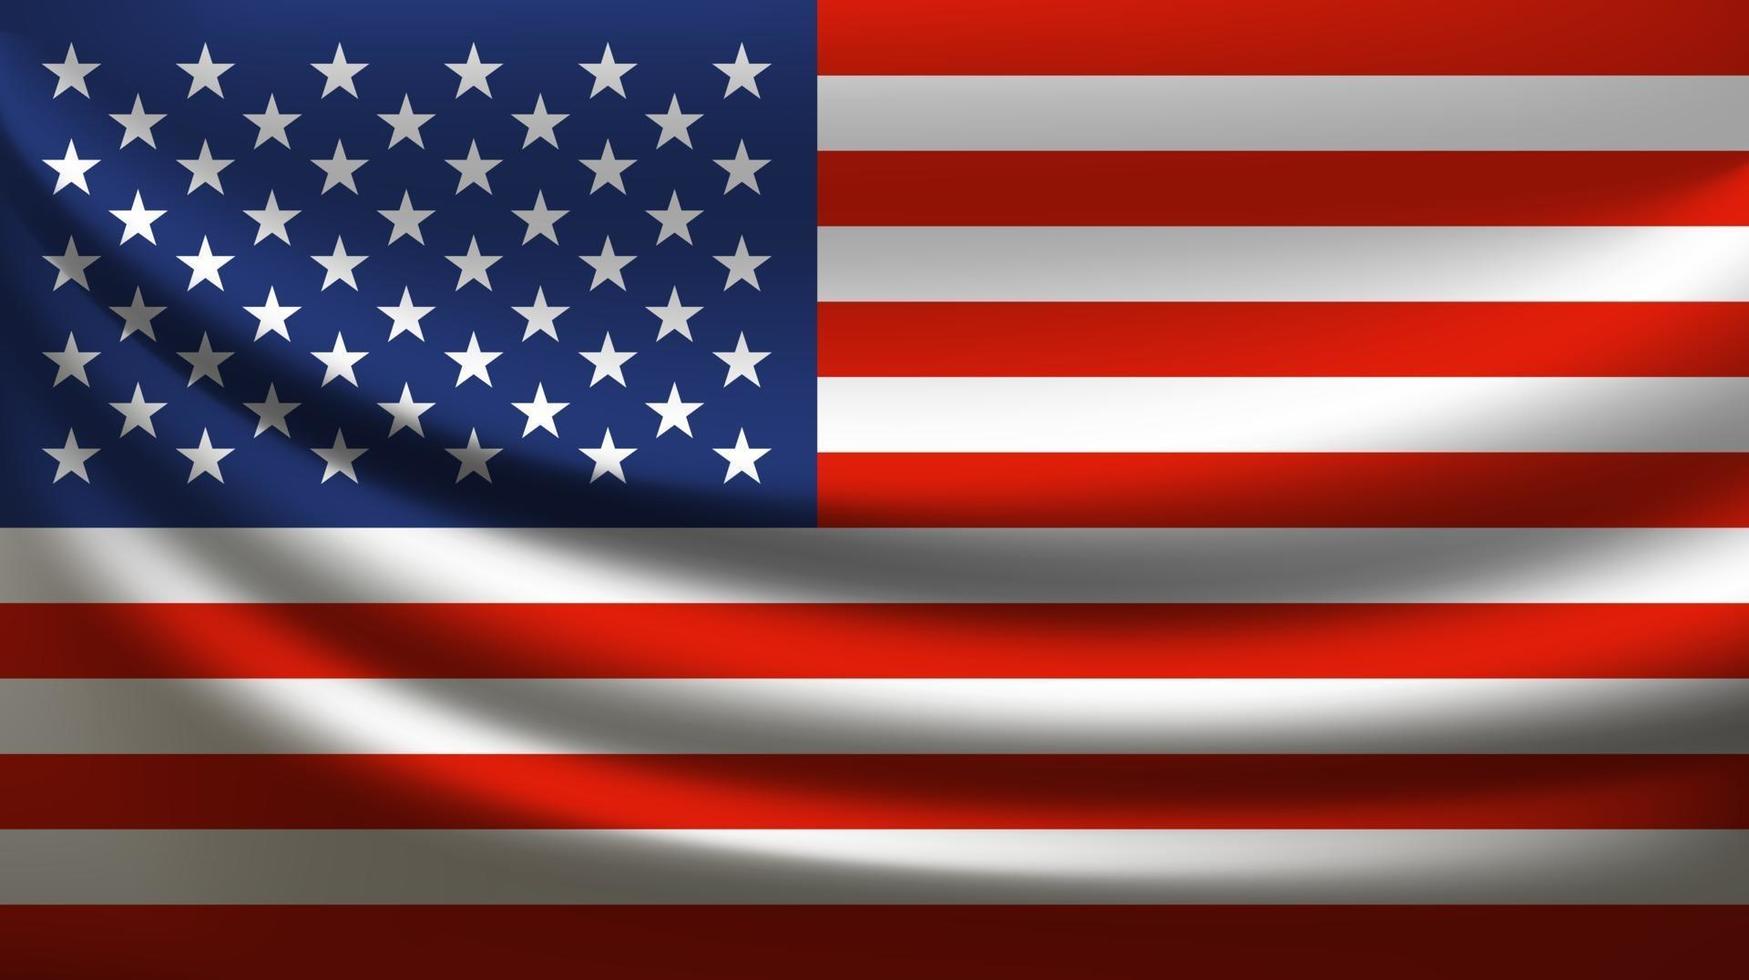 United states of America waving flag vector